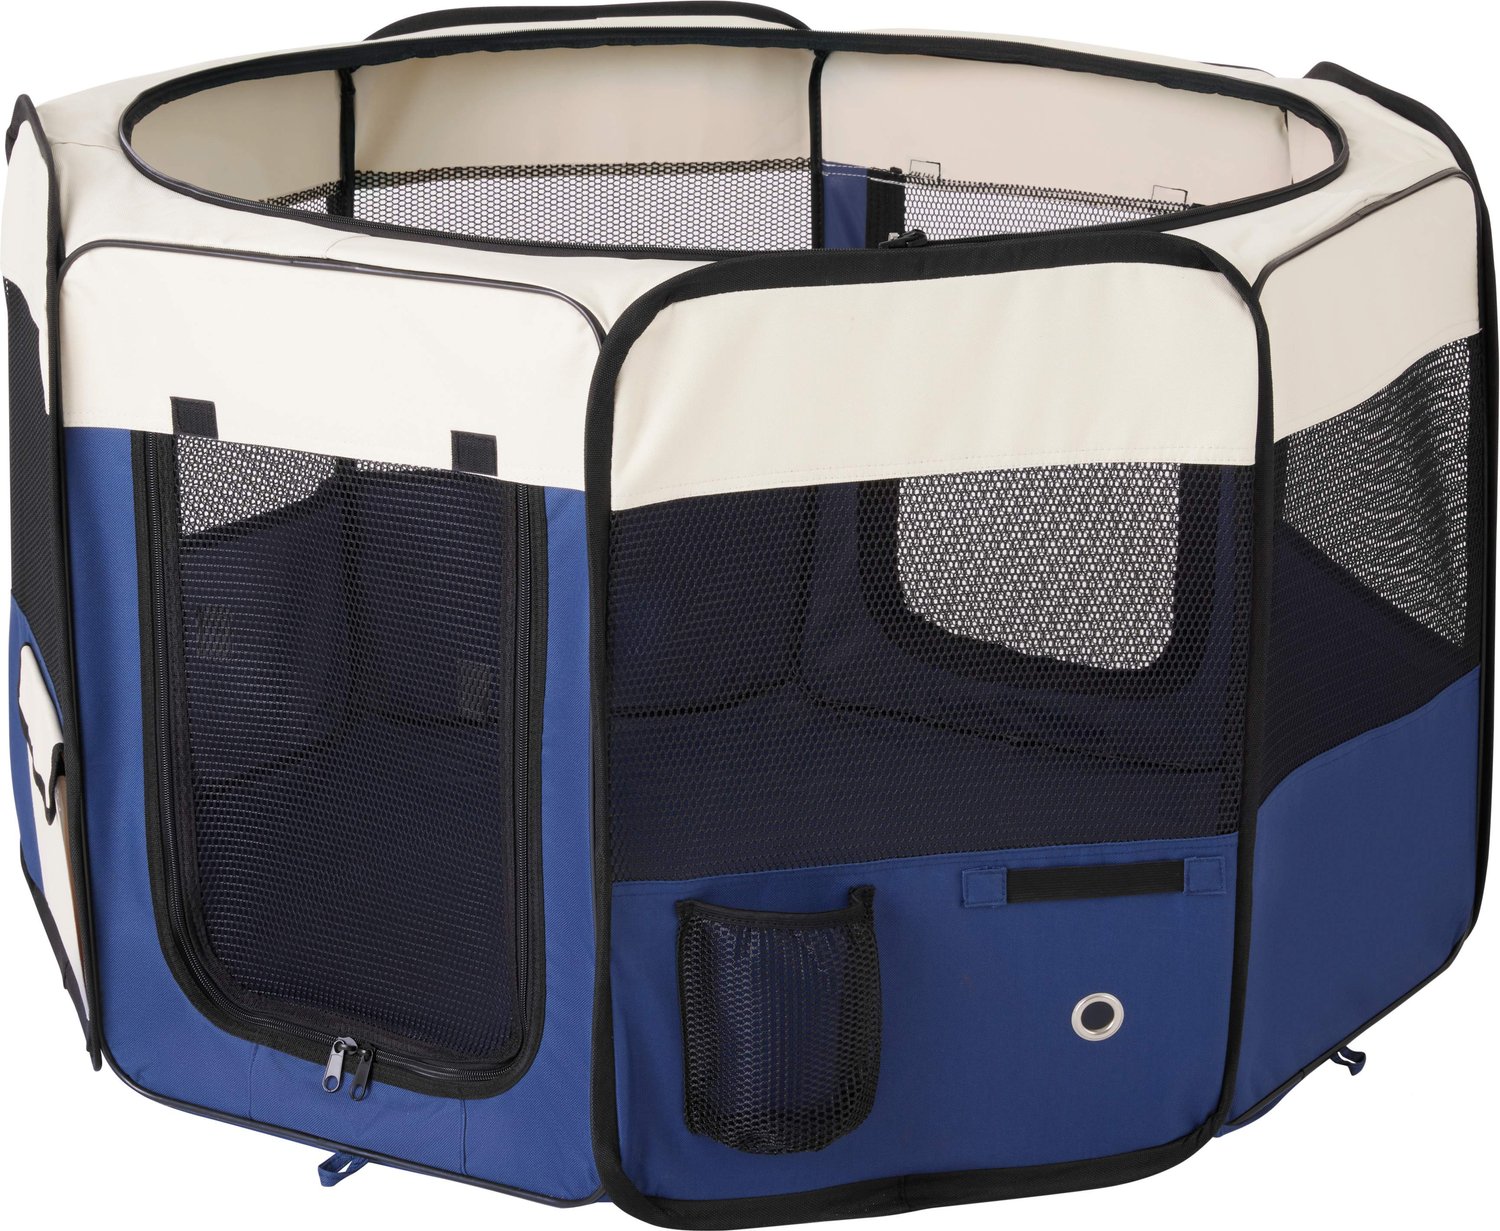 FRISCO Soft-Sided Dog, Cat & Small Pet Exercise Playpen, Cream/Navy, 42-in  L x 42-in W x 24-in H